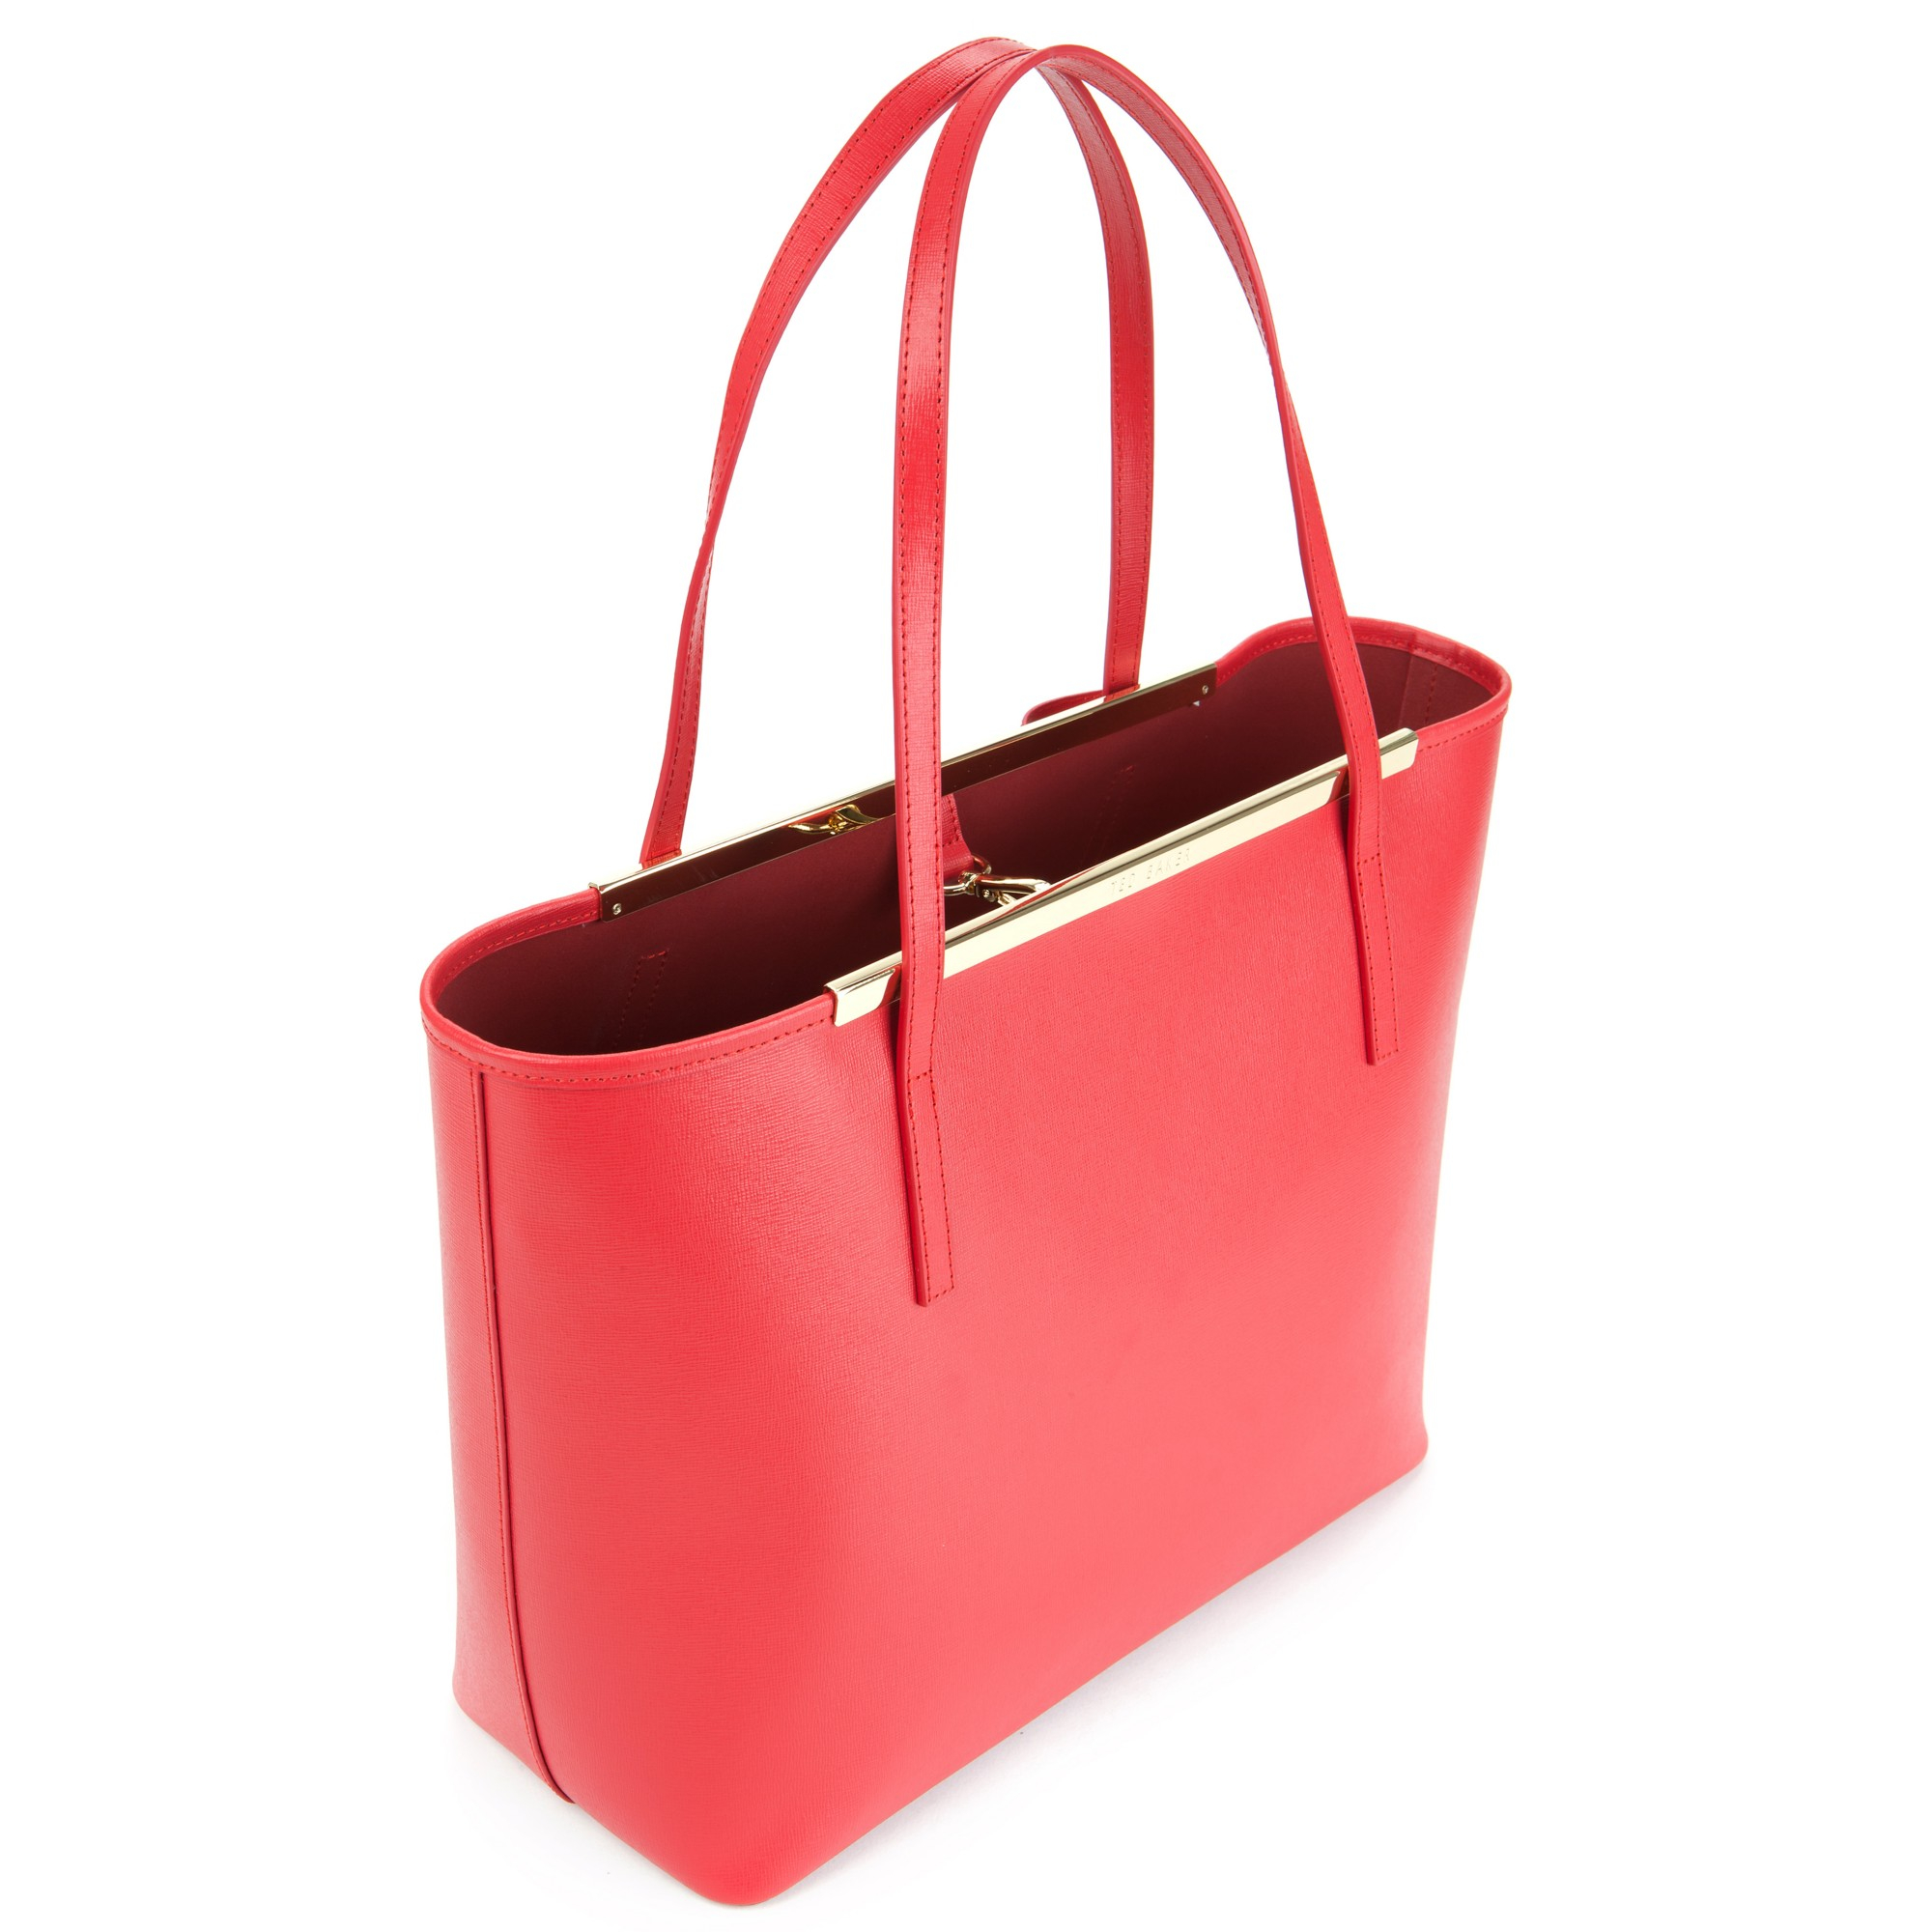 Lyst - Ted Baker Lilley Small Crosshatch Shopper Bag in Red